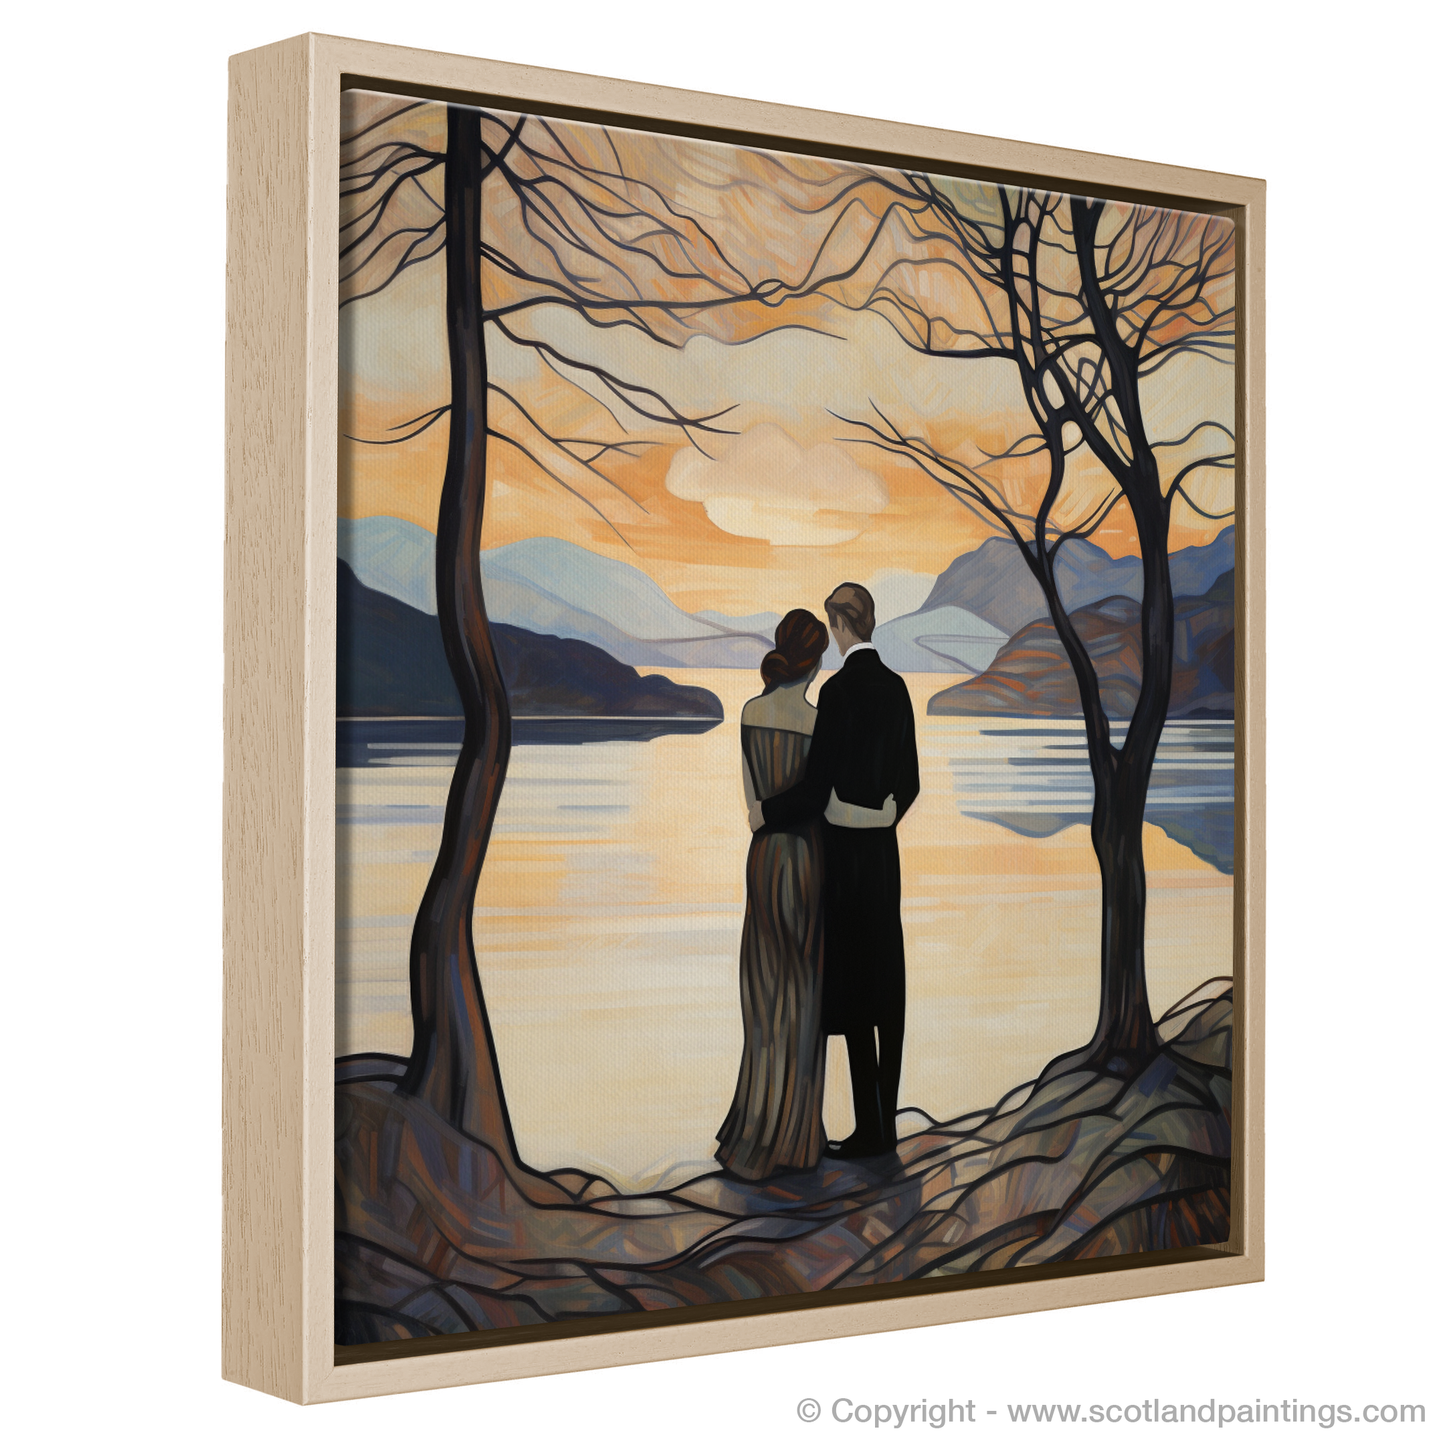 Painting and Art Print of A couple holding hands looking out on Loch Lomond entitled "Embracing the Beauty of Loch Lomond".